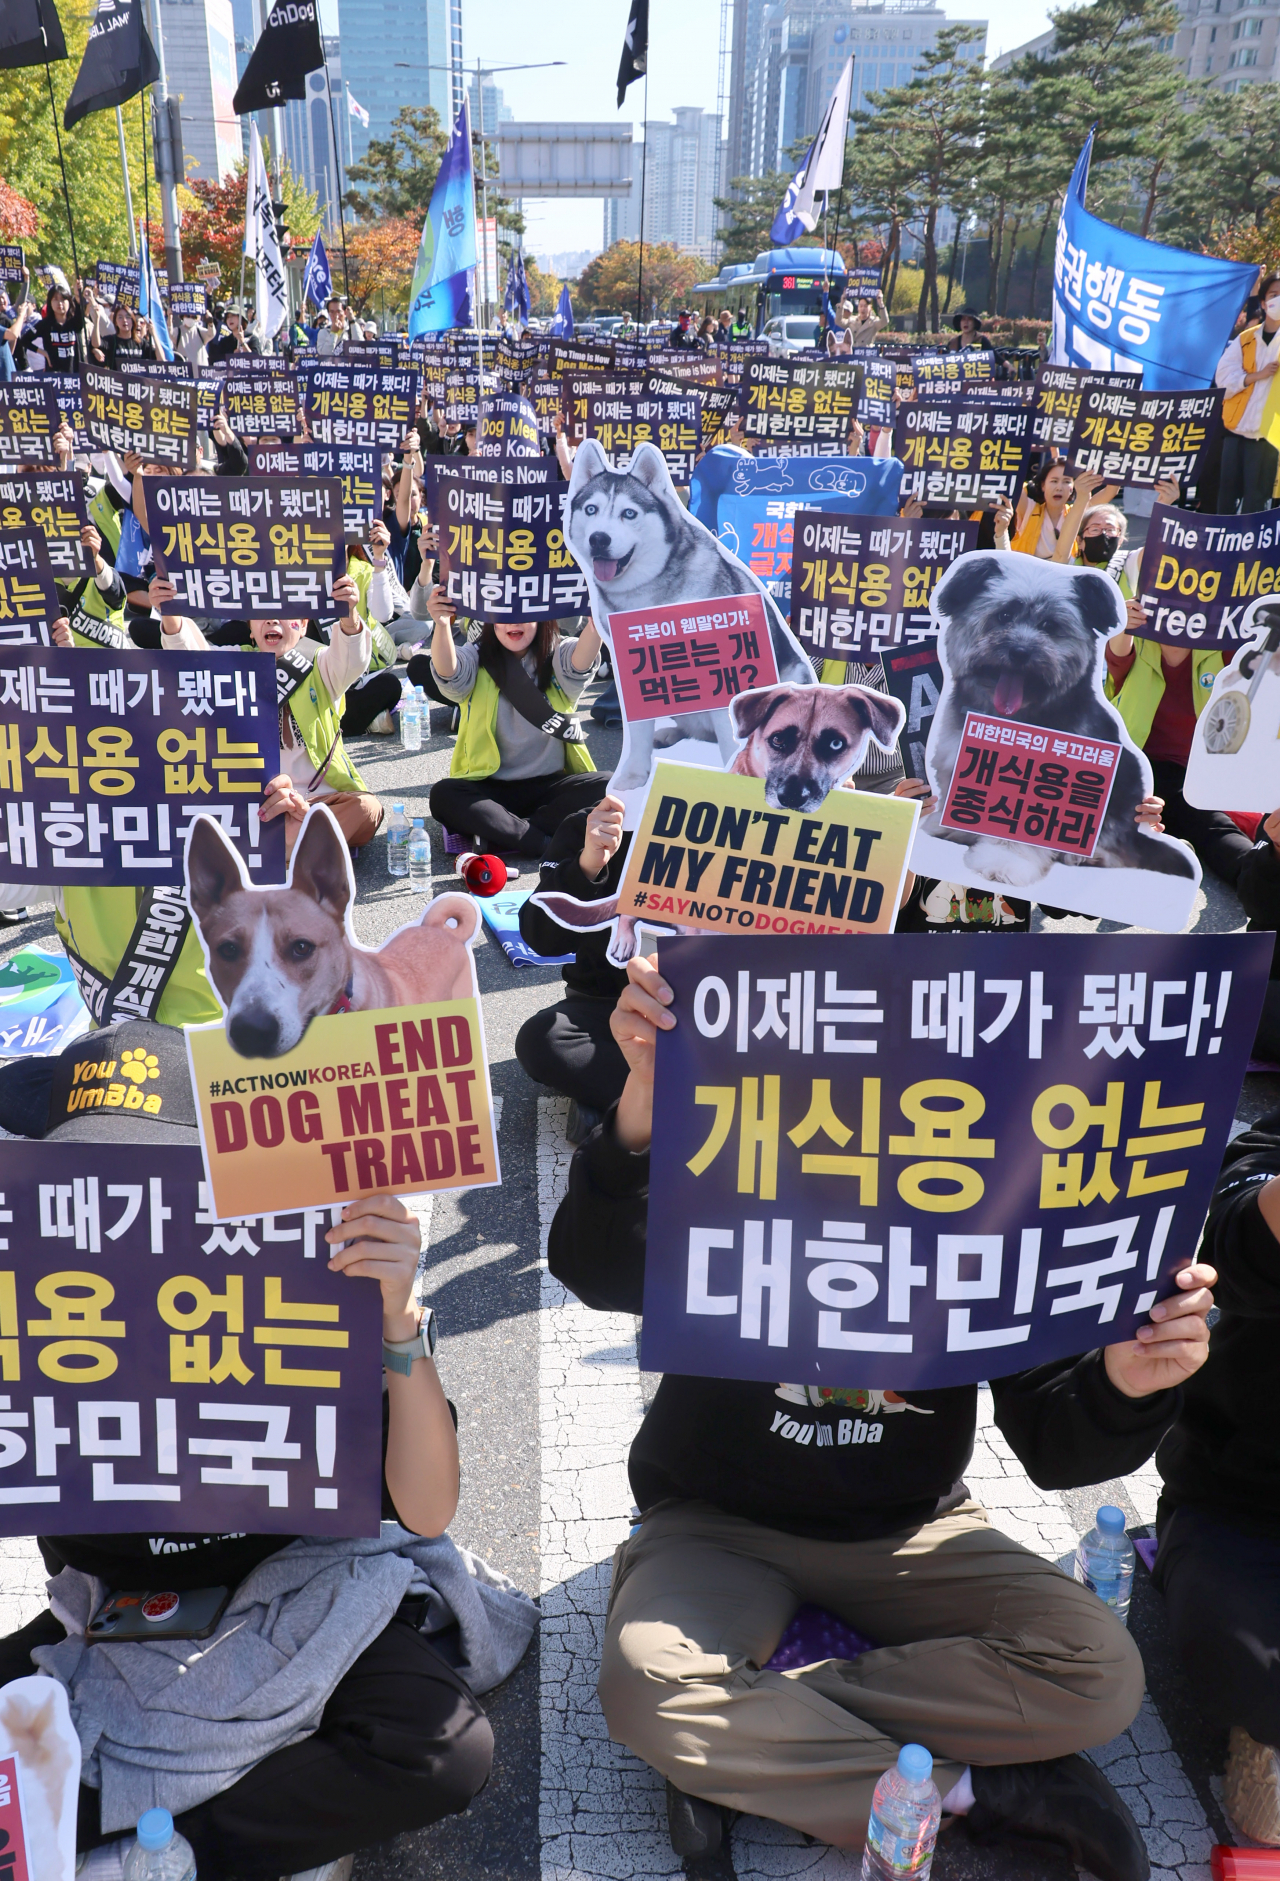 A protest against the dog meat trade in South Korea is being held in front of the National Assembly in Seoul on Oct. 29. (Yonhap)